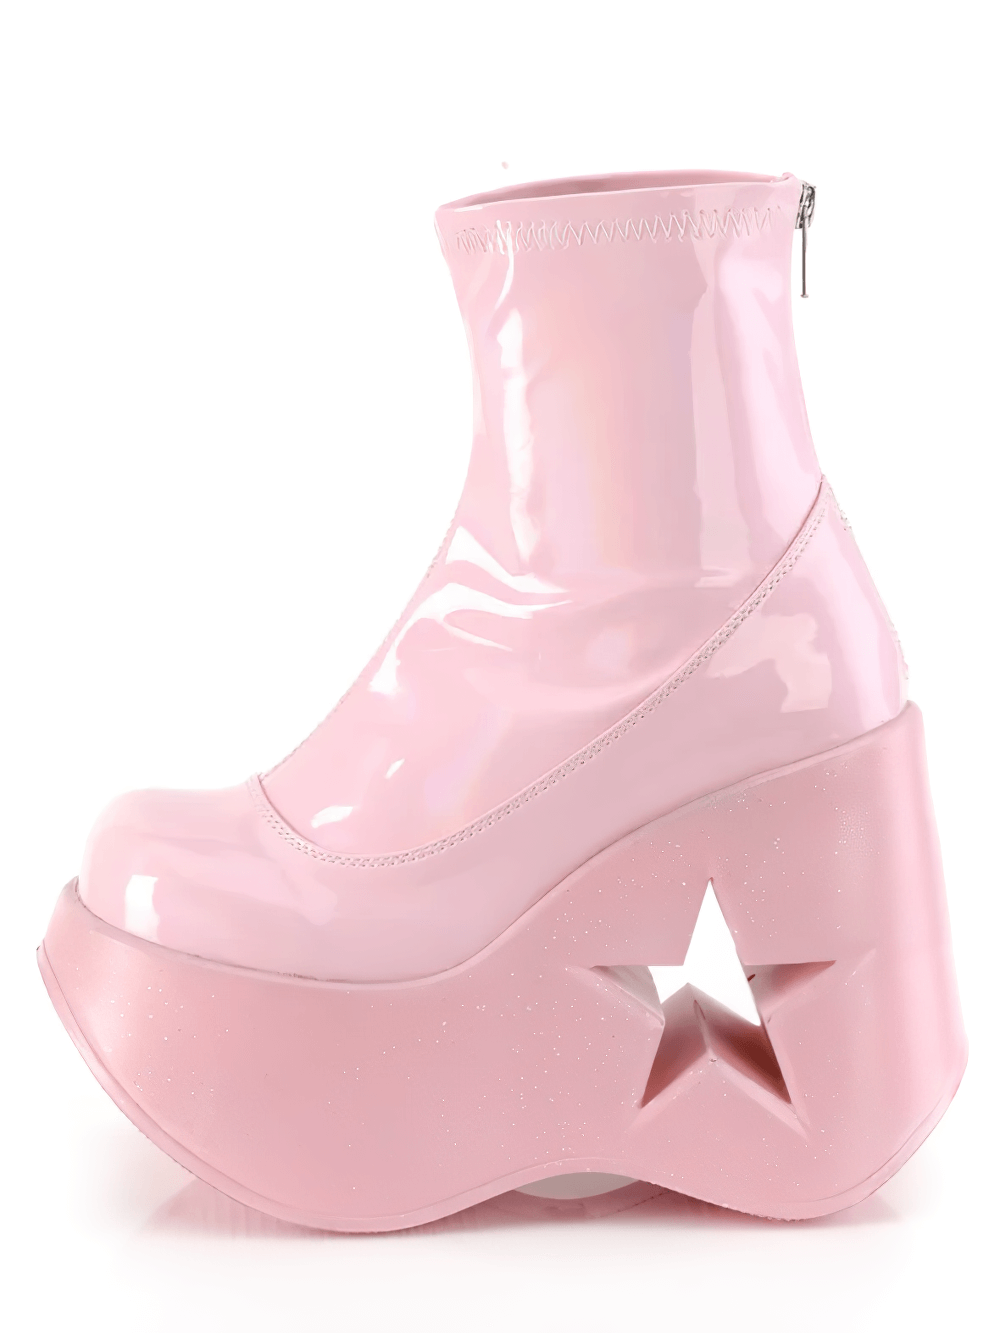 DEMONIA Pink Holographic Star Cutout Platform Ankle Boots